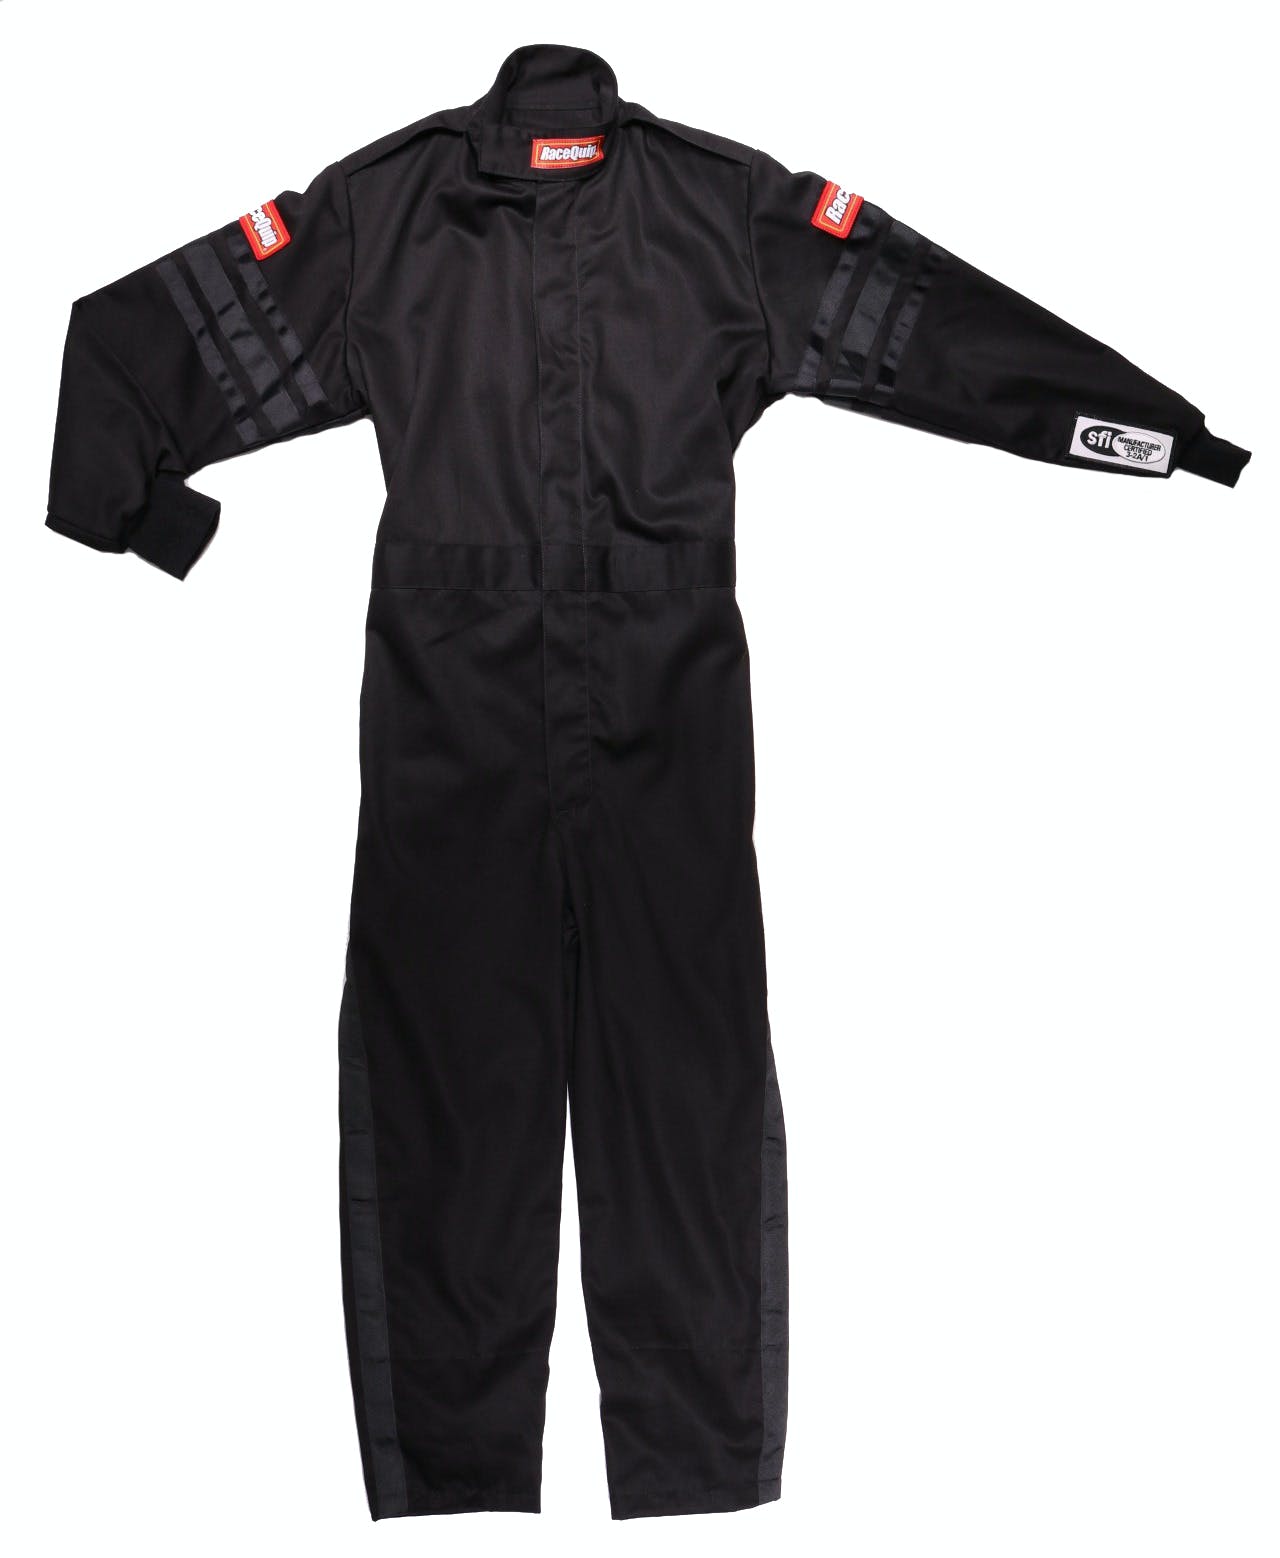 RaceQuip 1959996 SFI-1 Pyrovatex One-Piece Single-Layer Youth Racing Fire Suit (Black/Blue-XL)